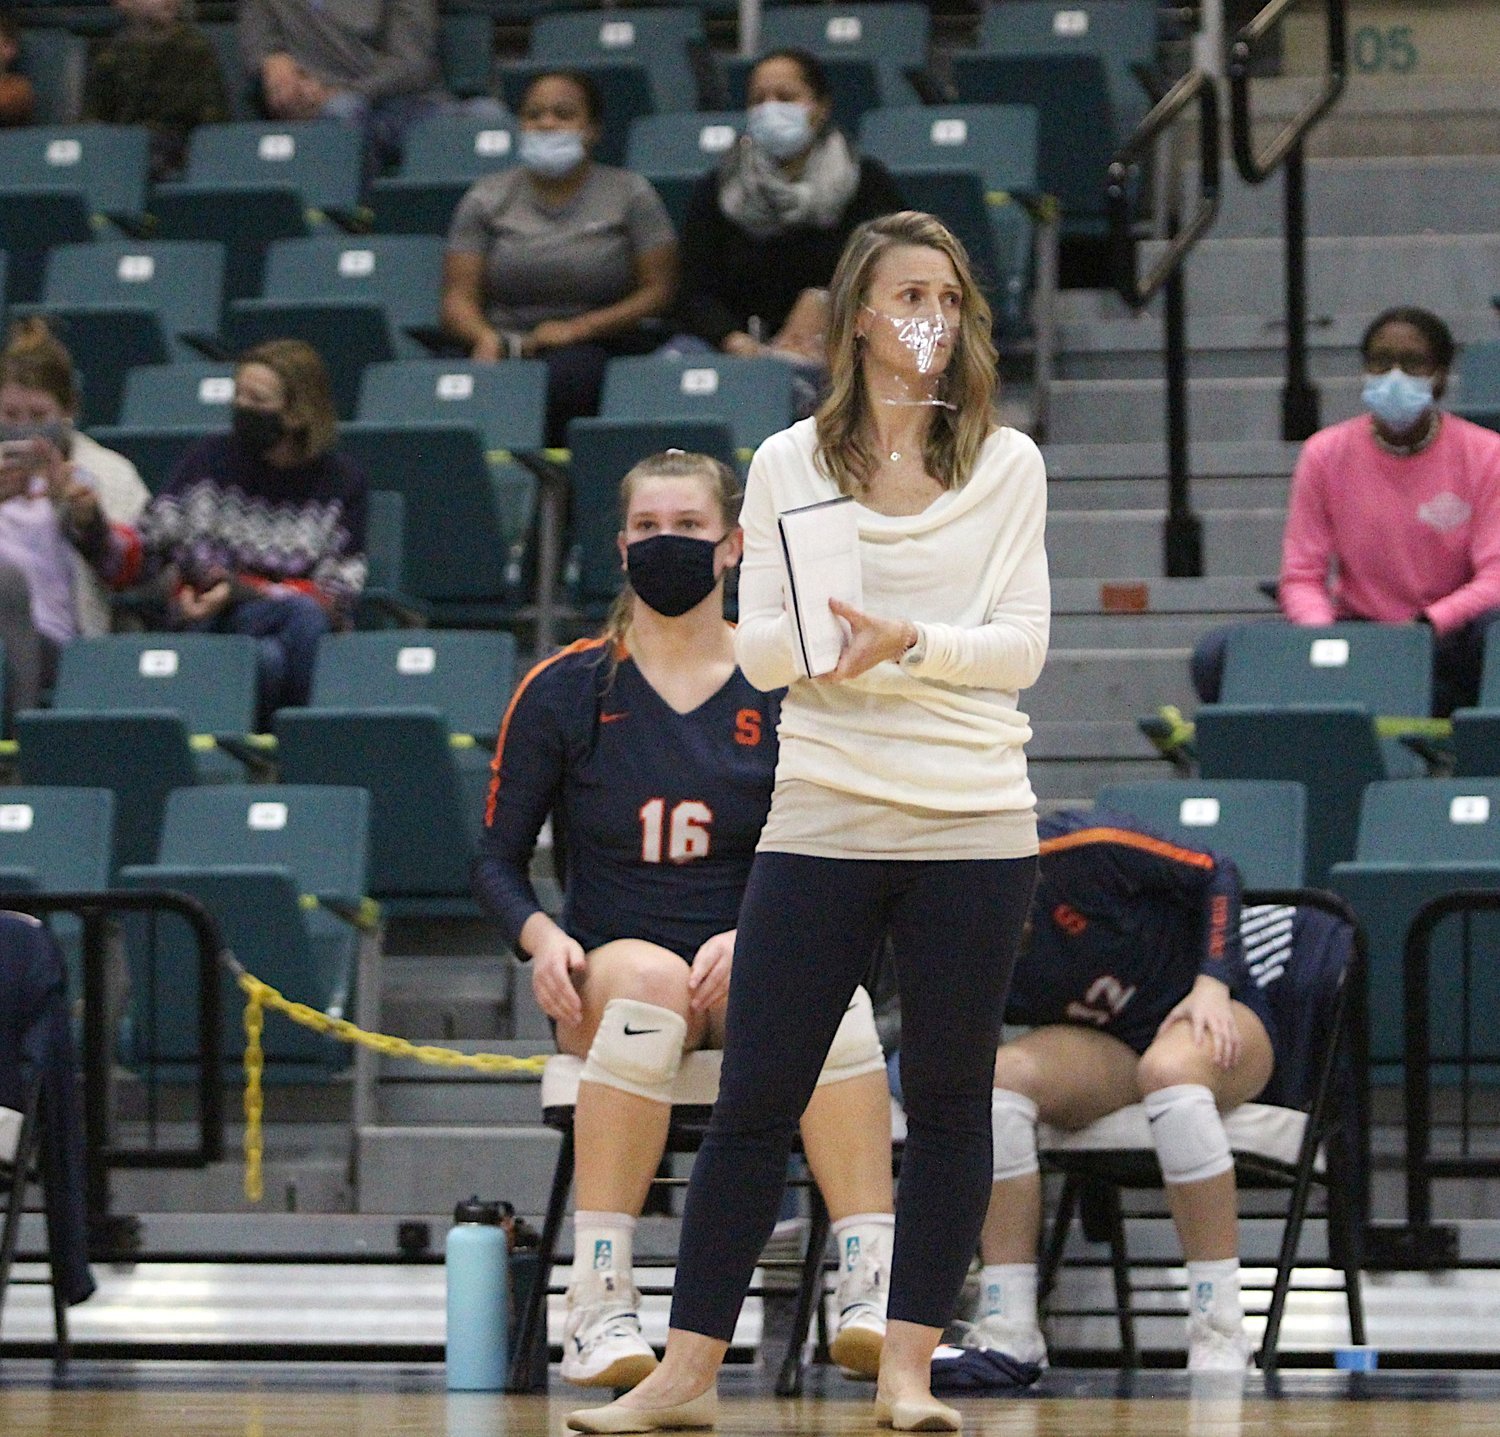 Seven Lakes volleyball coach Amy Cataline keeps an eye on her players at the team’s Class 6A regional final match against Katy High School on Dec. 4, 2020, at the Merrell Center. Seven Lakes class of 2021 graduate Kailey Bickel said at the time that she’d never seen a coach that cares about her players as much as Cataline does.